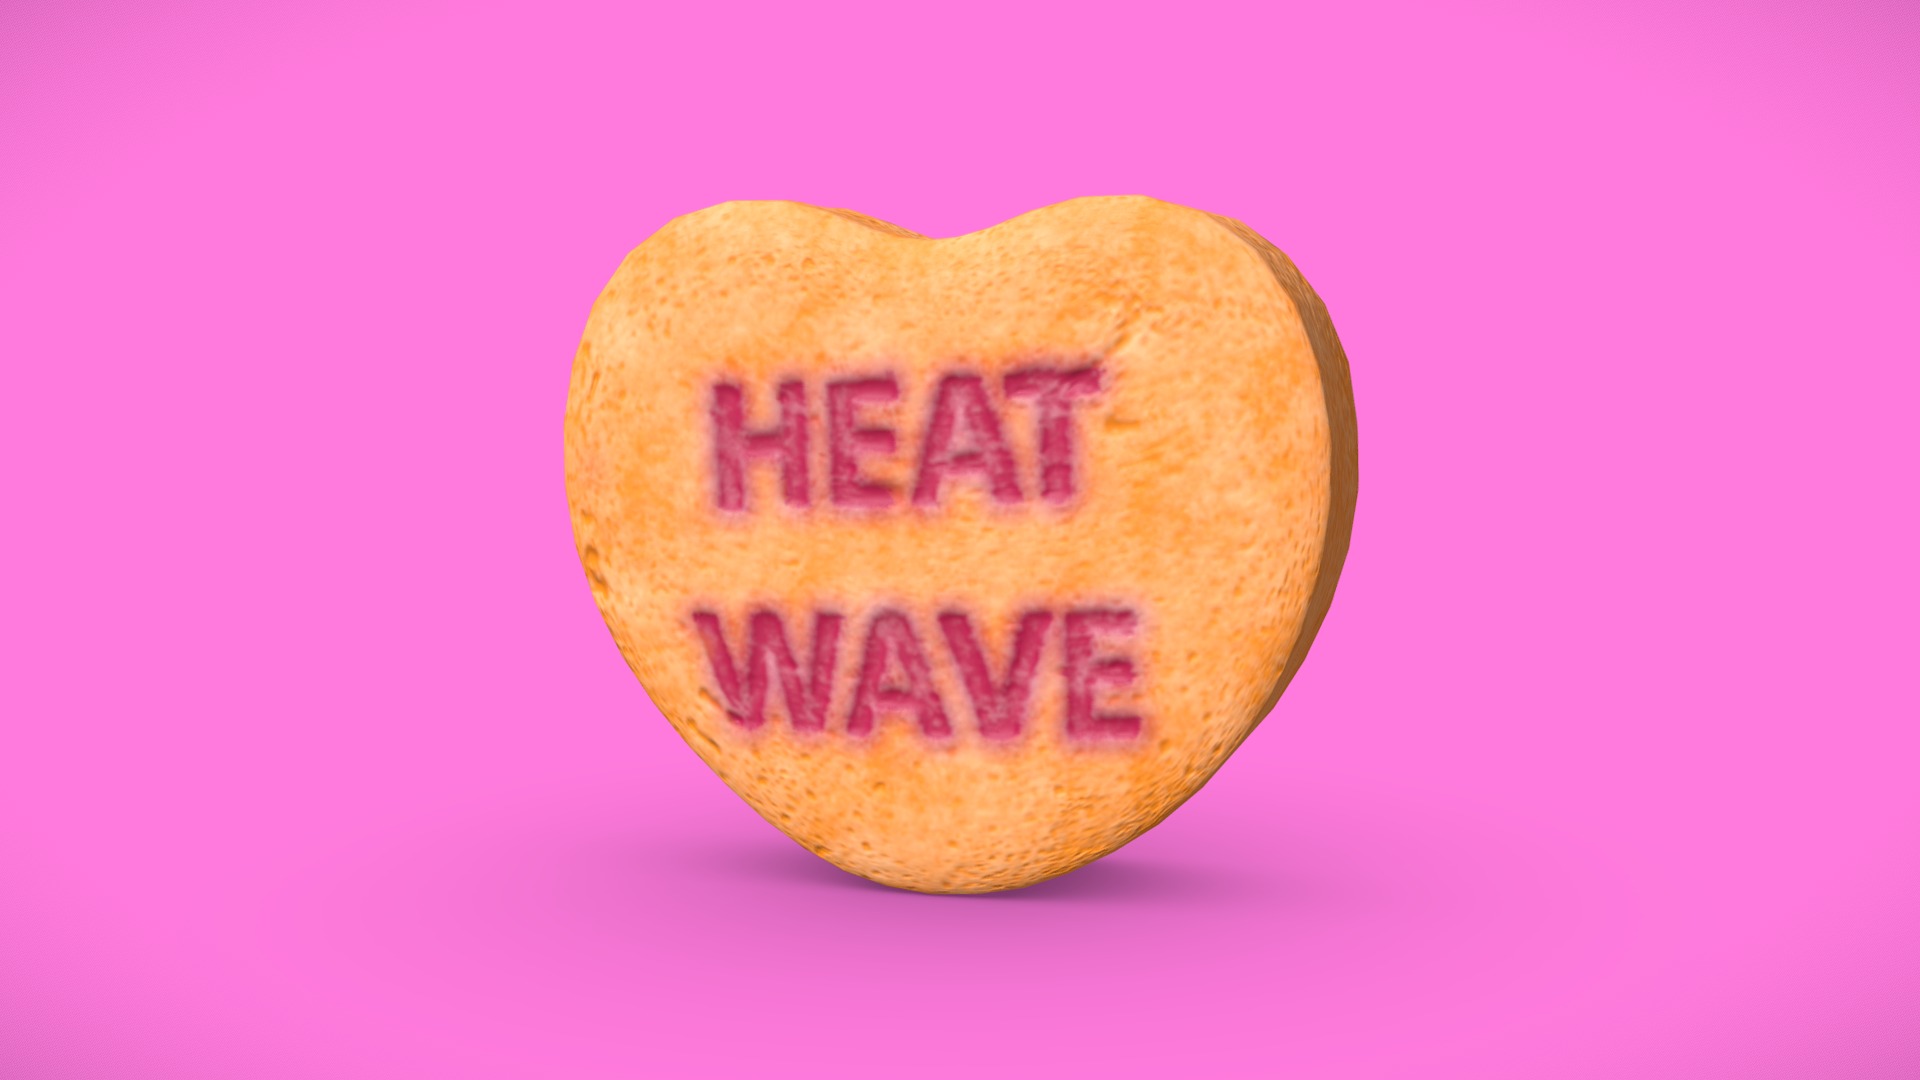 3D model Heart Candy – Heat Wave - This is a 3D model of the Heart Candy - Heat Wave. The 3D model is about a yellow potato with a pink background.